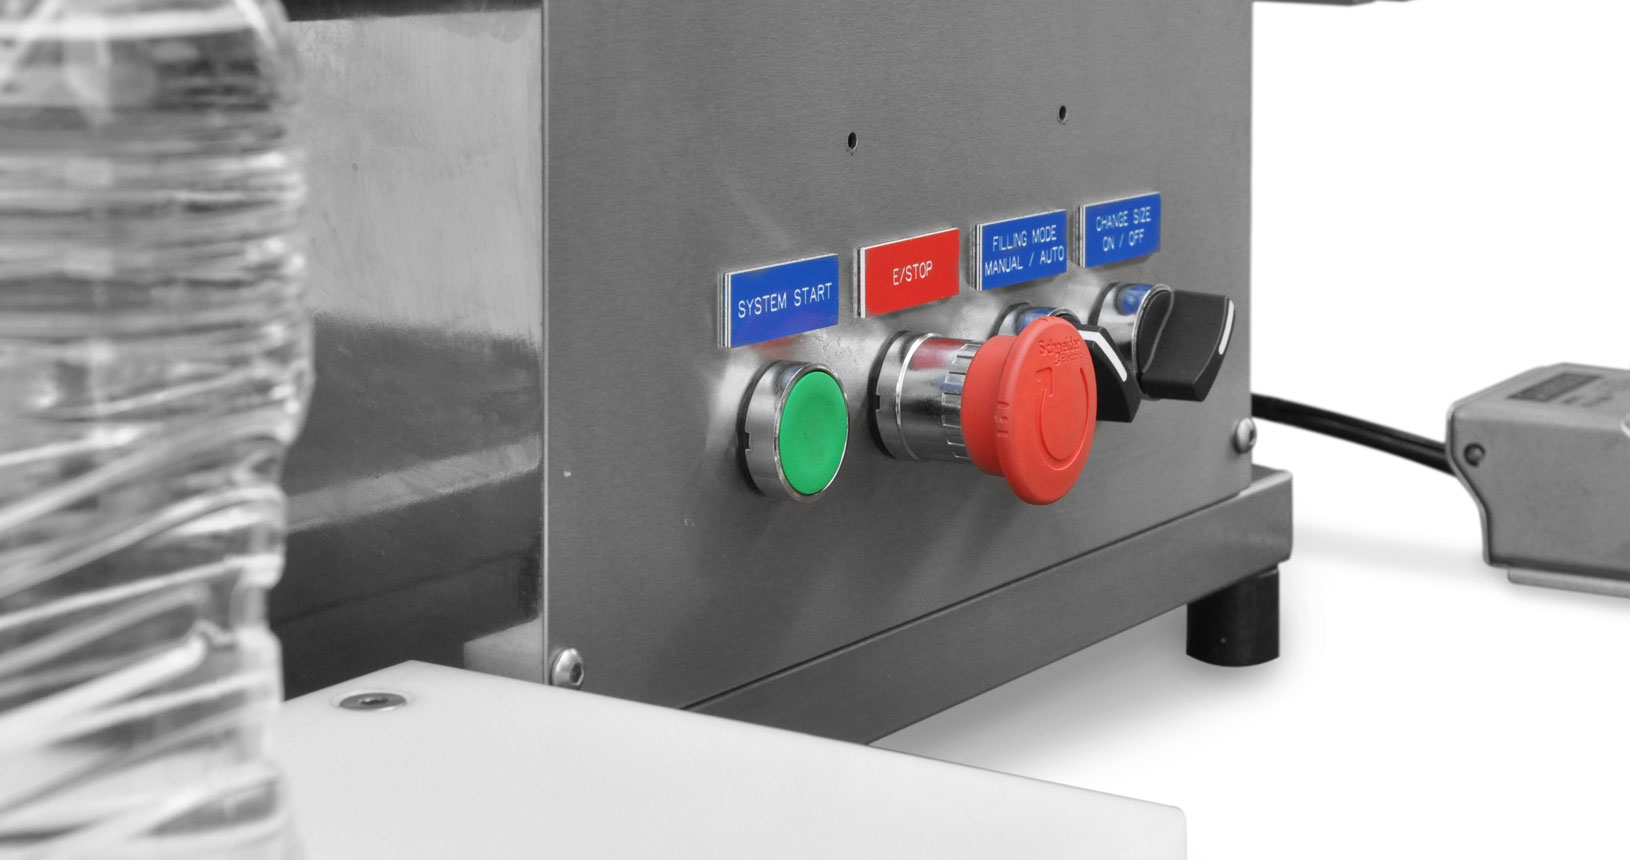 Easy to use controls for filling, manual, auto and changing dispensing volume are located at a convenient spot.